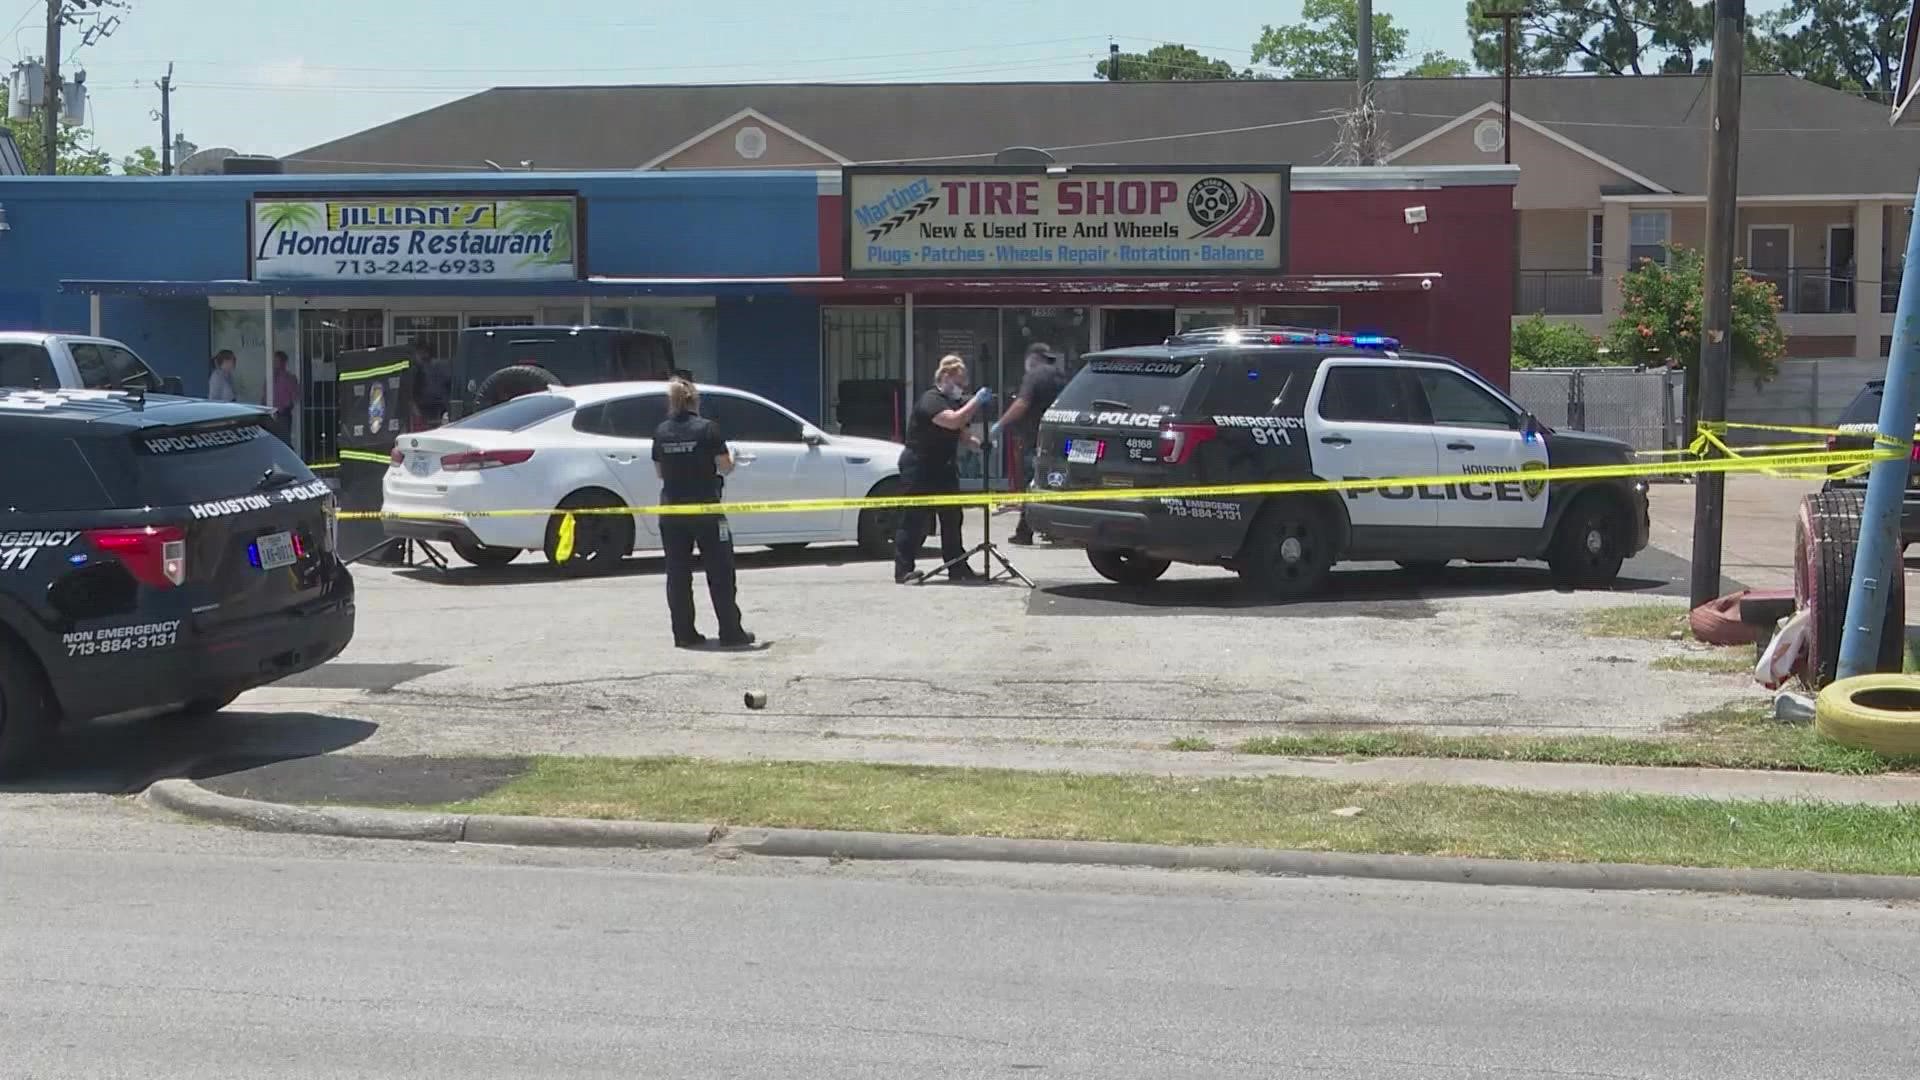 Two people were killed when a gunman opened fire at a tire shop at 7550 Bellfort Avenue, near Leonora Street, in southeast Houston.